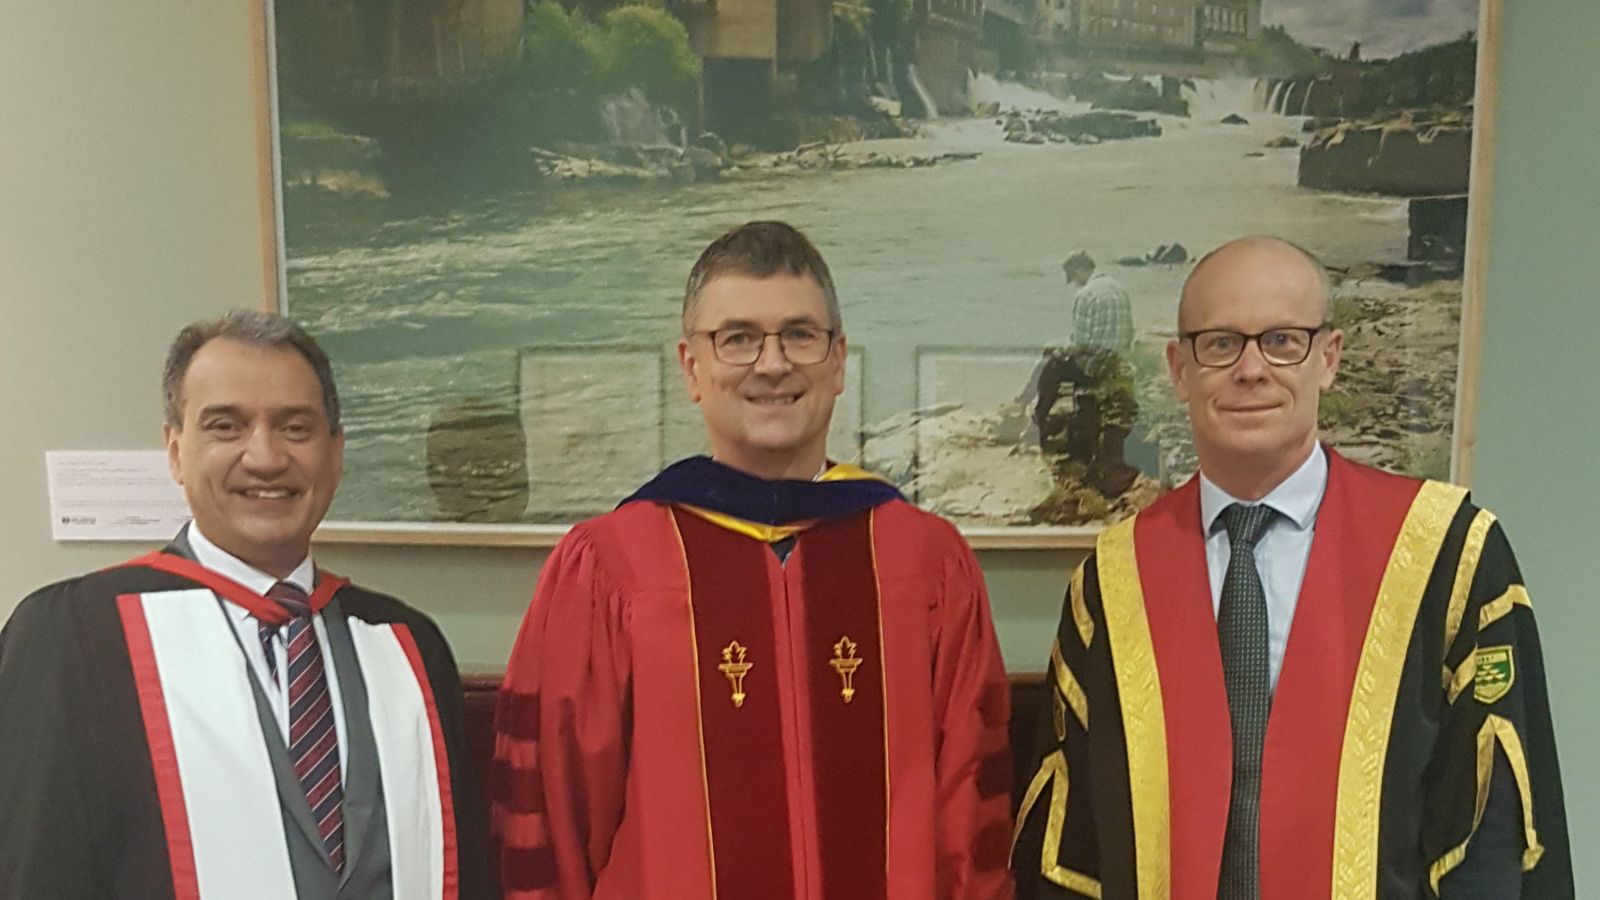 Head and shoulders portrait of Professor Ehsan Mesbahi, Professor Nicholas Long, and Professor Nic Smith dressed in academic robes.